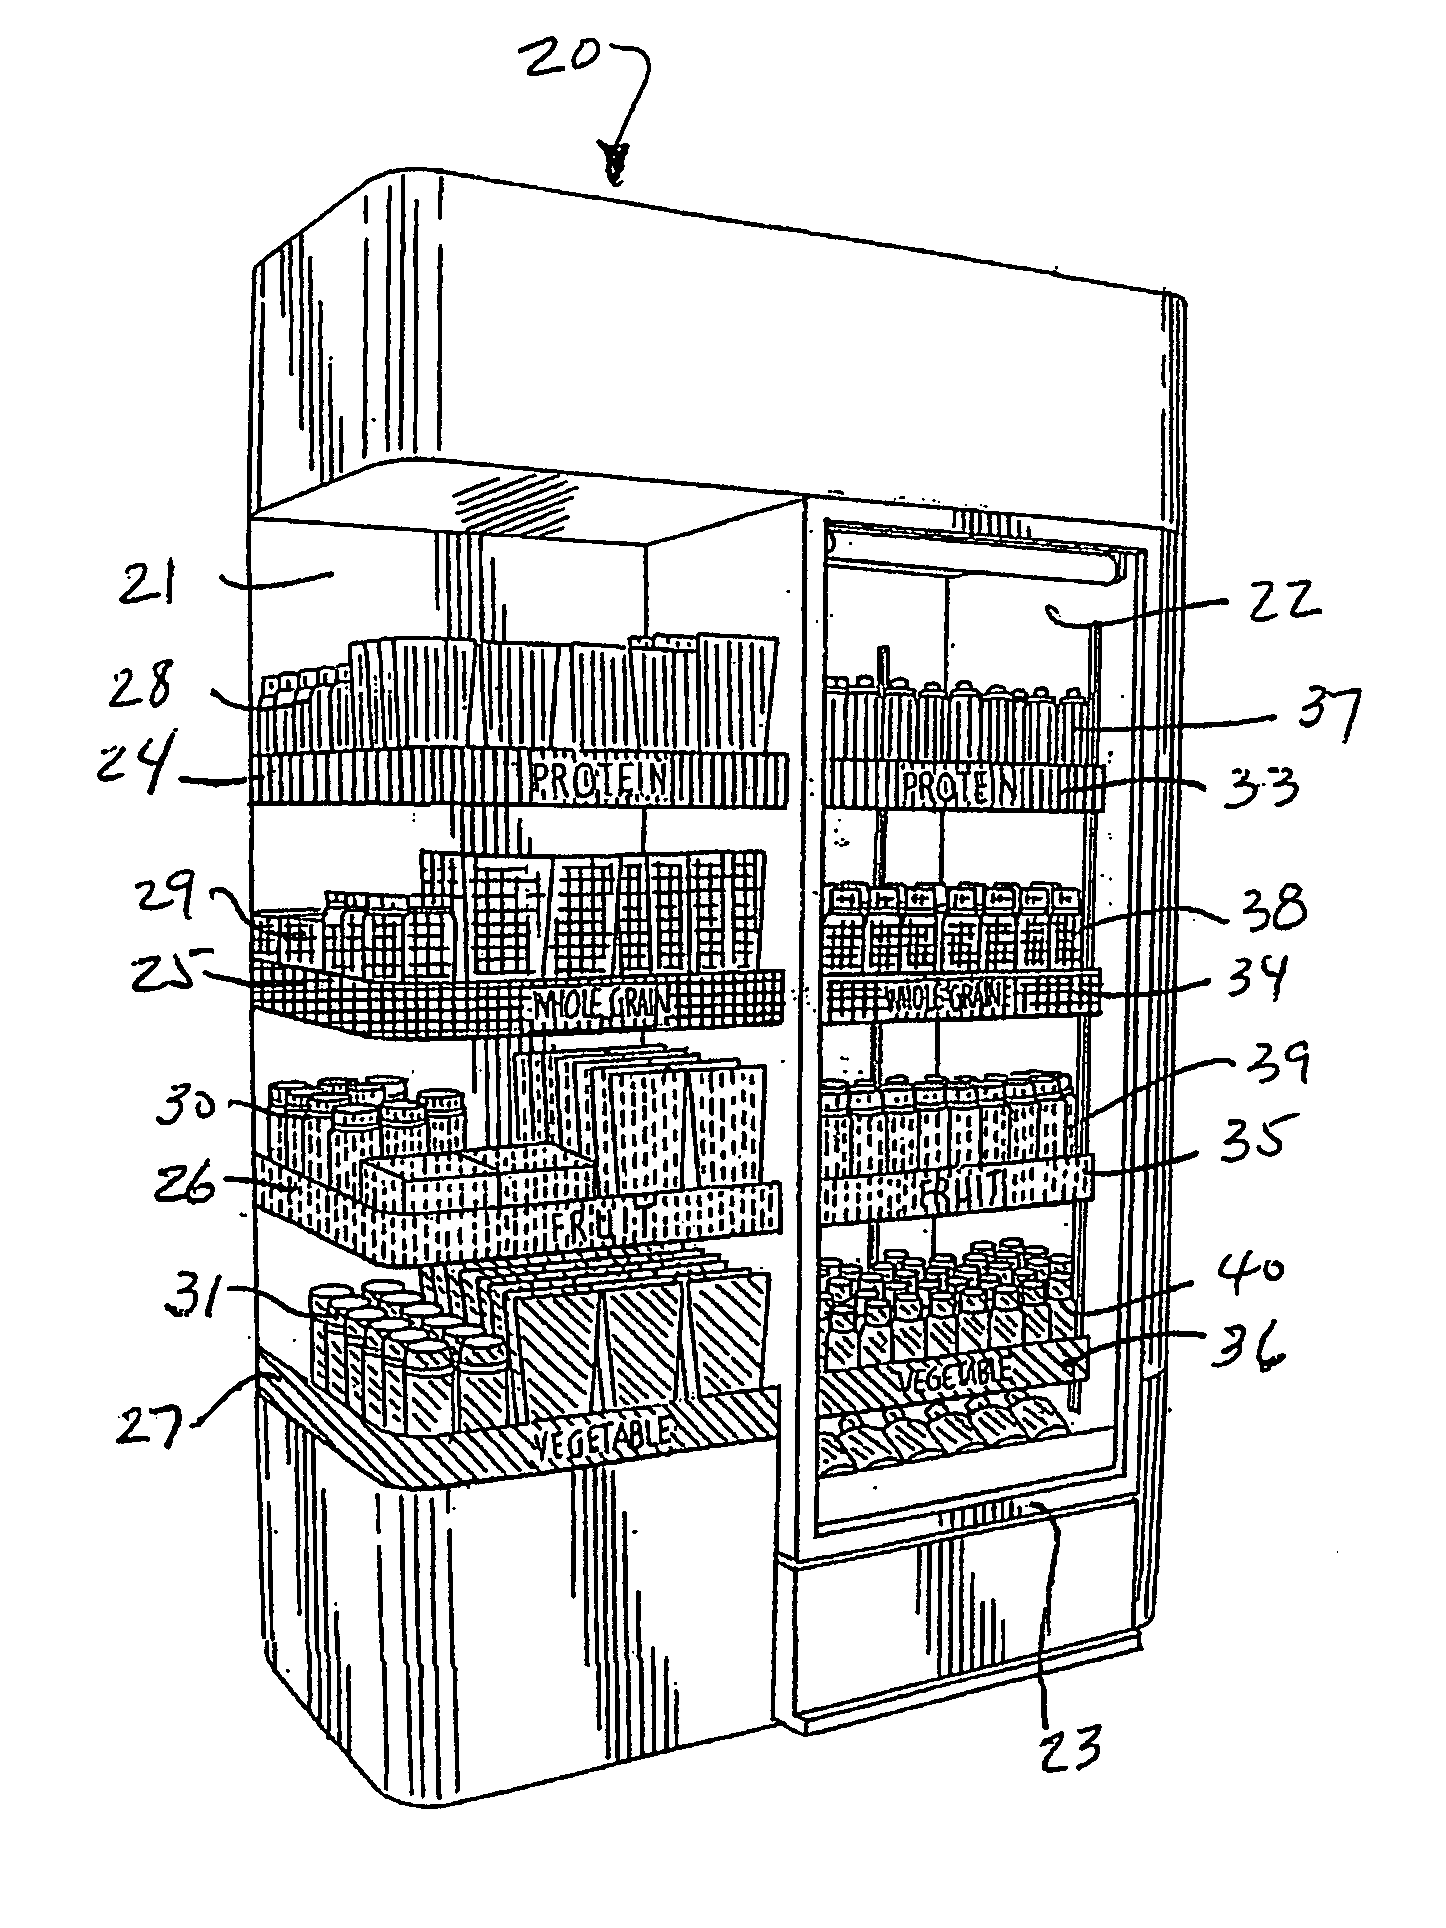 Merchandizing display systems and methods